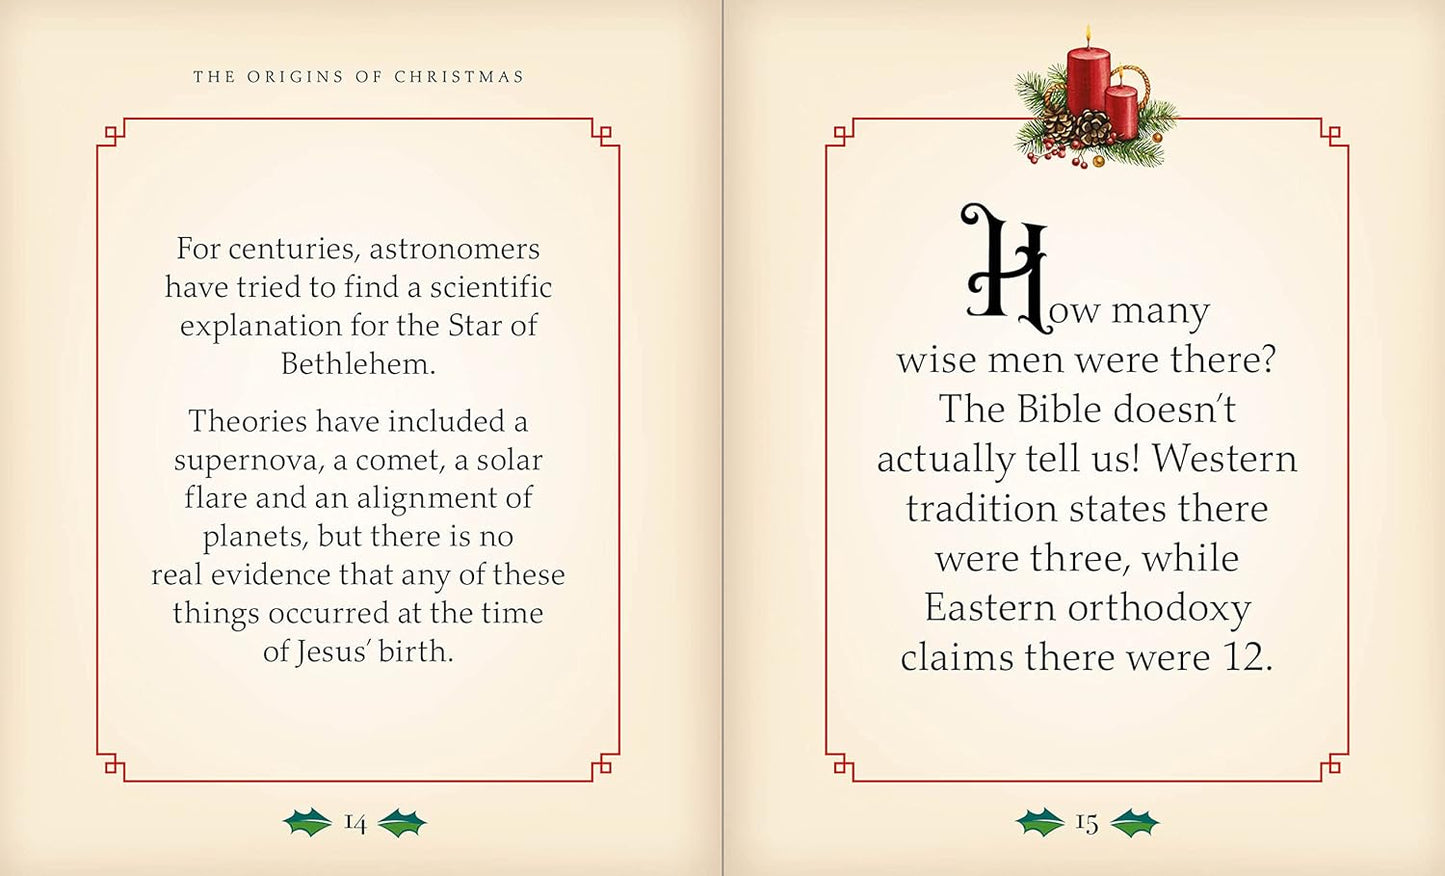 inside pages of book with Christmas trivia.